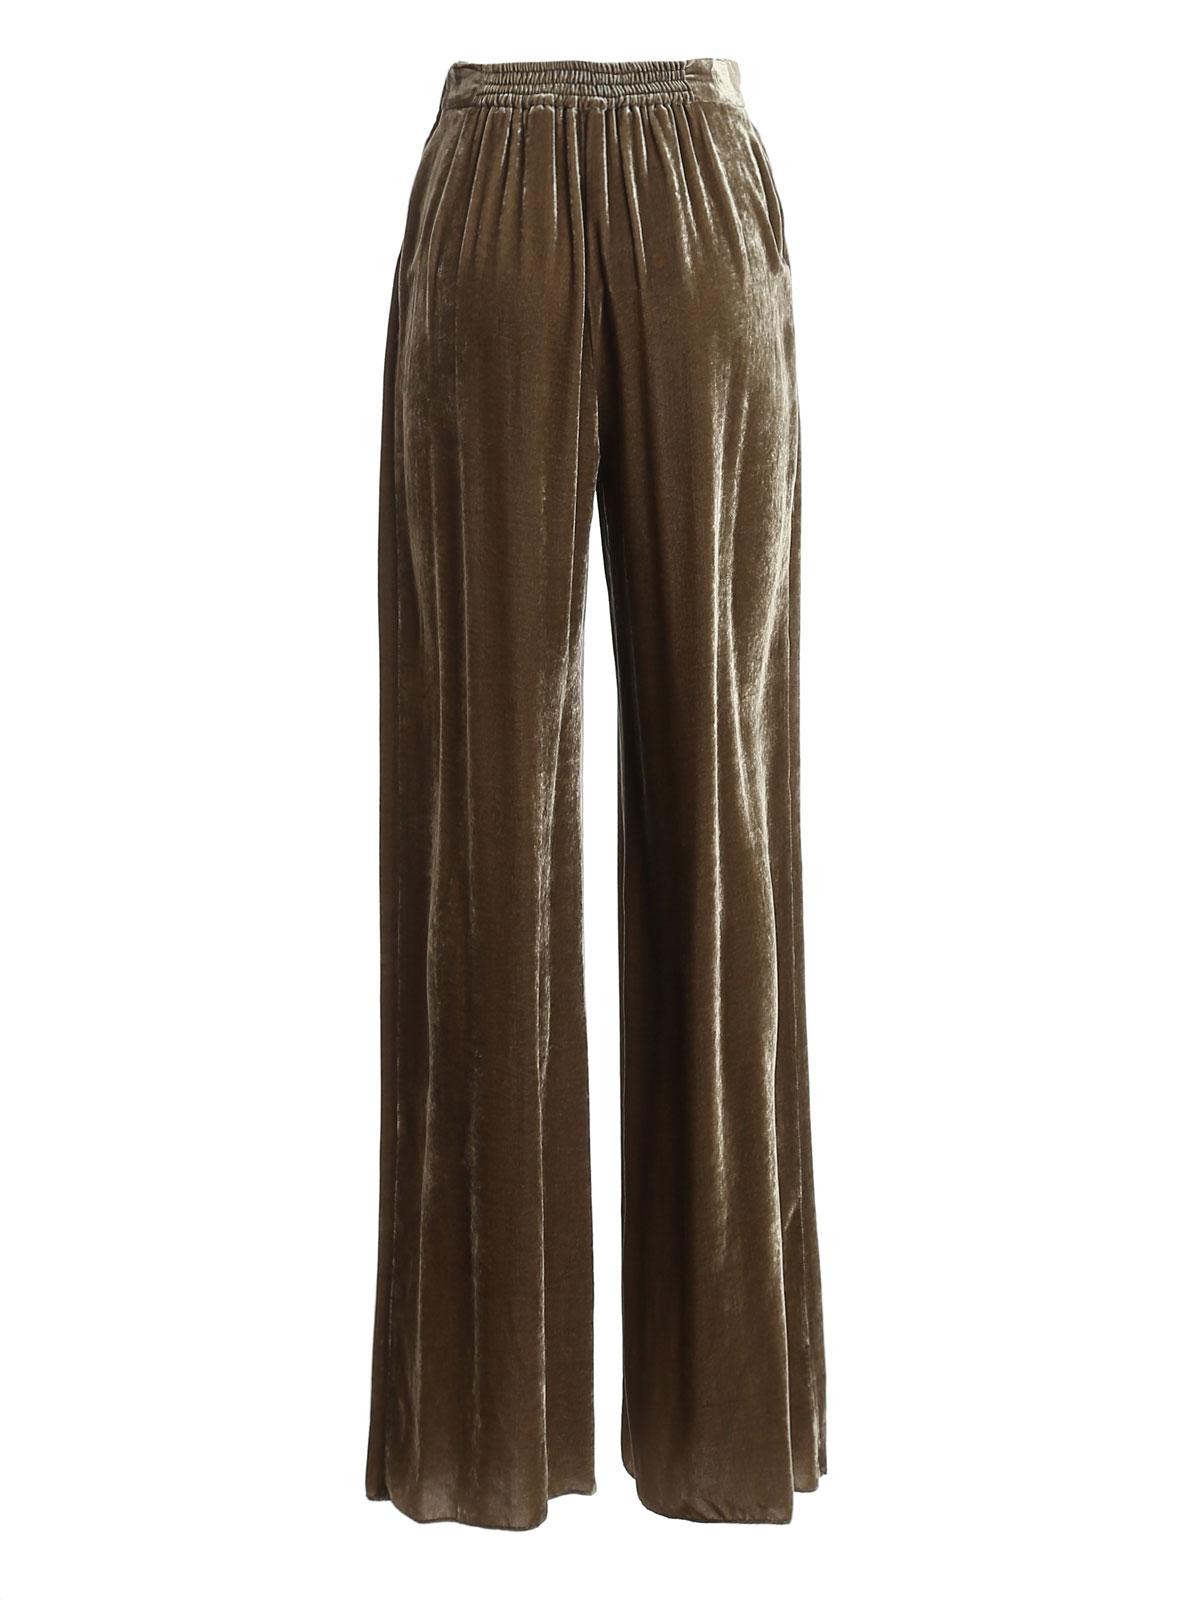 Etro Velvet Palazzo Trousers in Light Brown (Brown) - Lyst